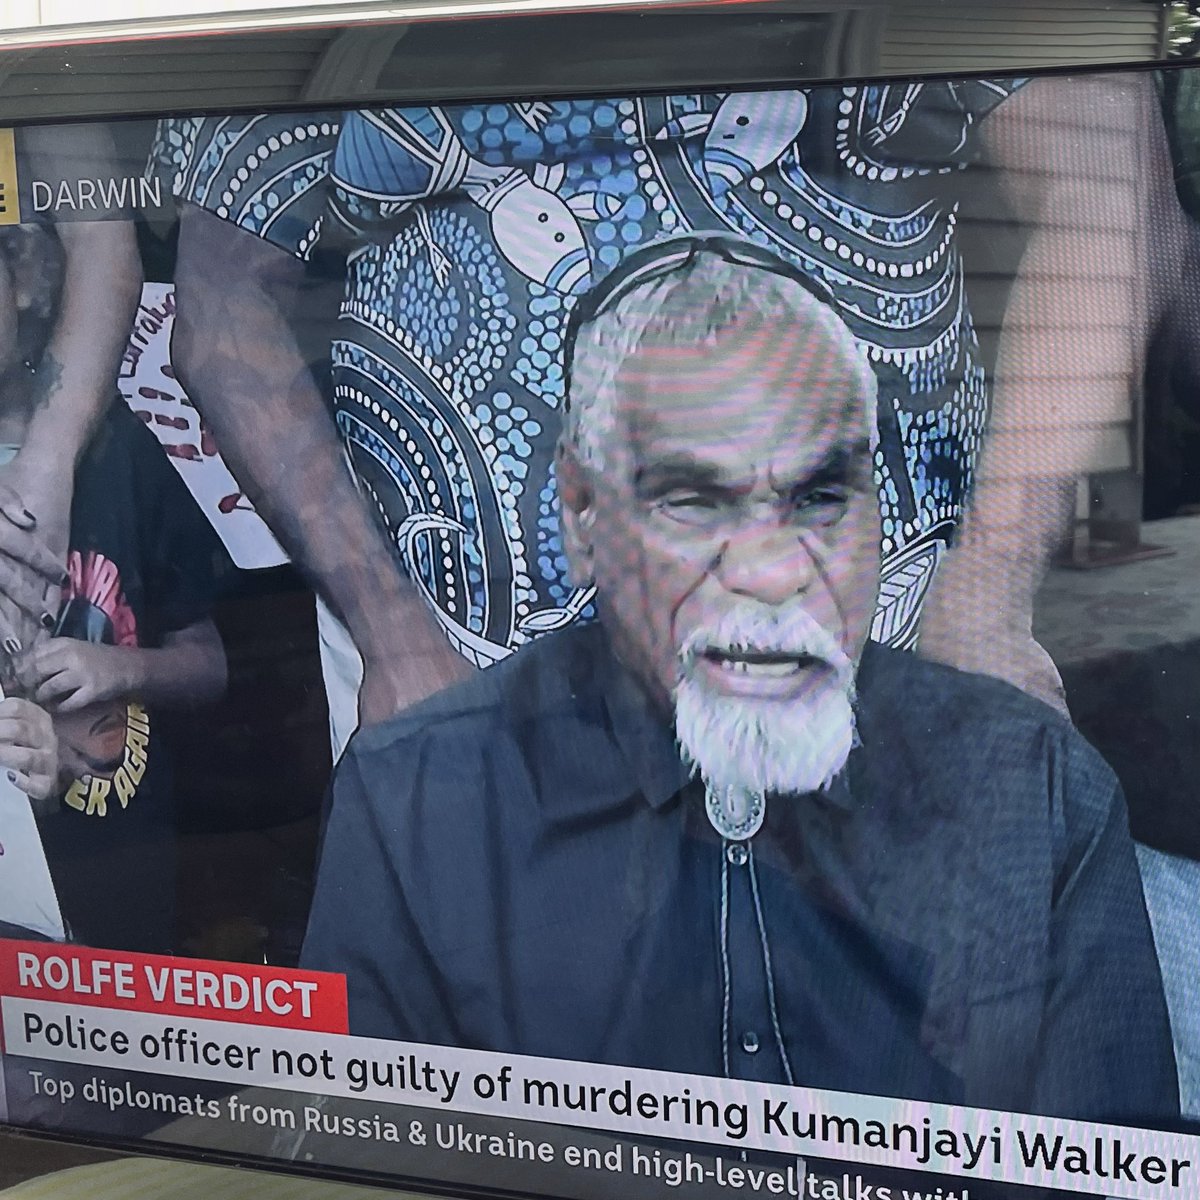 ‘No guns! No guns!! In remote communities.’ #justiceforwalker for Kumanjayi Walker. No more black deaths! The anger is palpable. Rightly so.